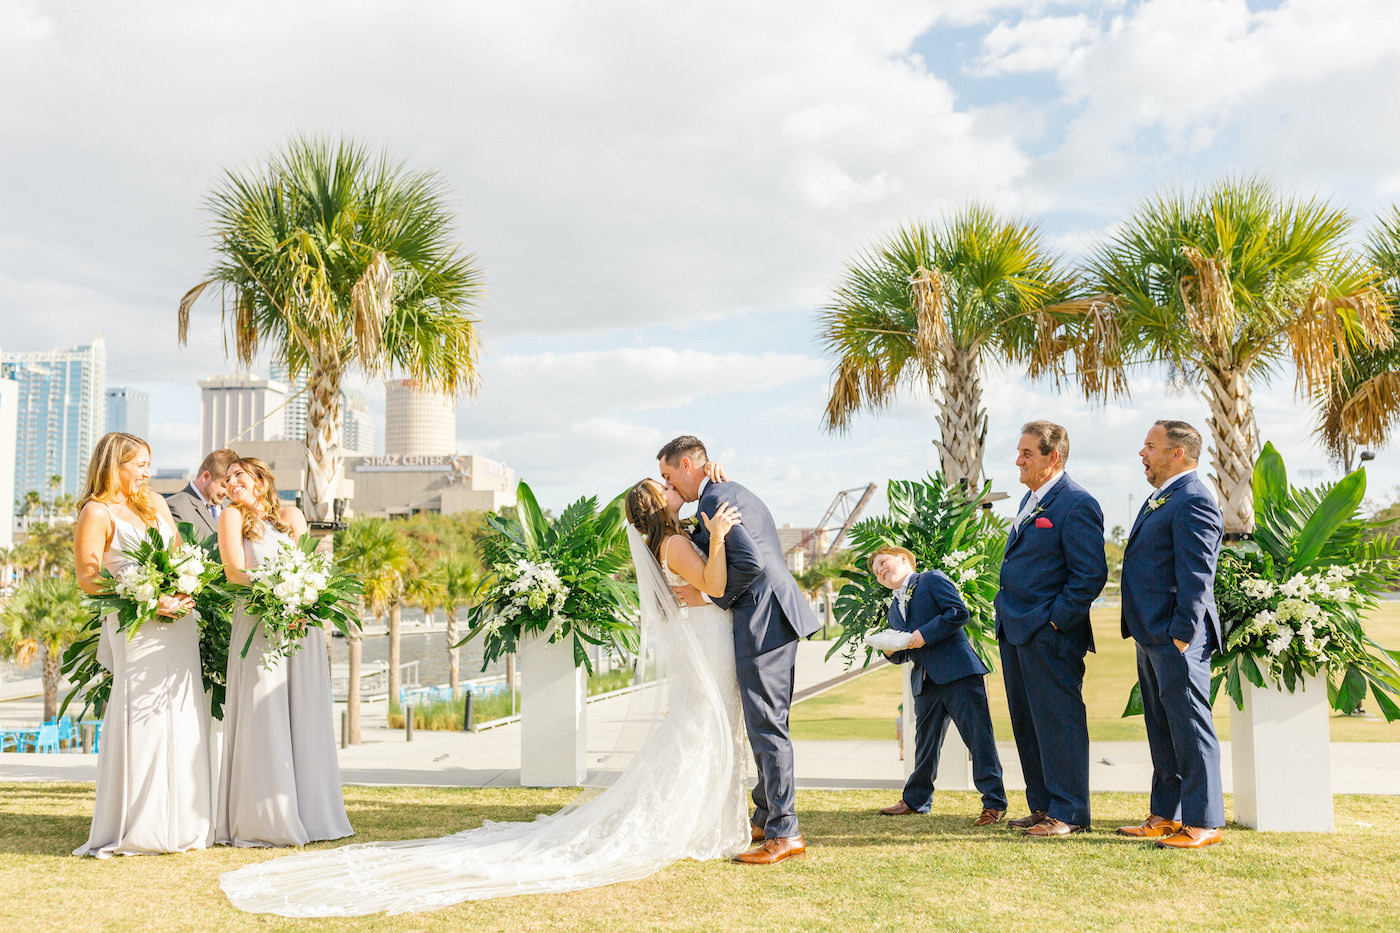 Bride and Groom First Kiss during Tropical Florida Wedding Outdoor Downtown Tampa Ceremony | White and Green Ceremony Floral Arrangements with Palm Leaves and Ferns and White Orchids atop White Columns